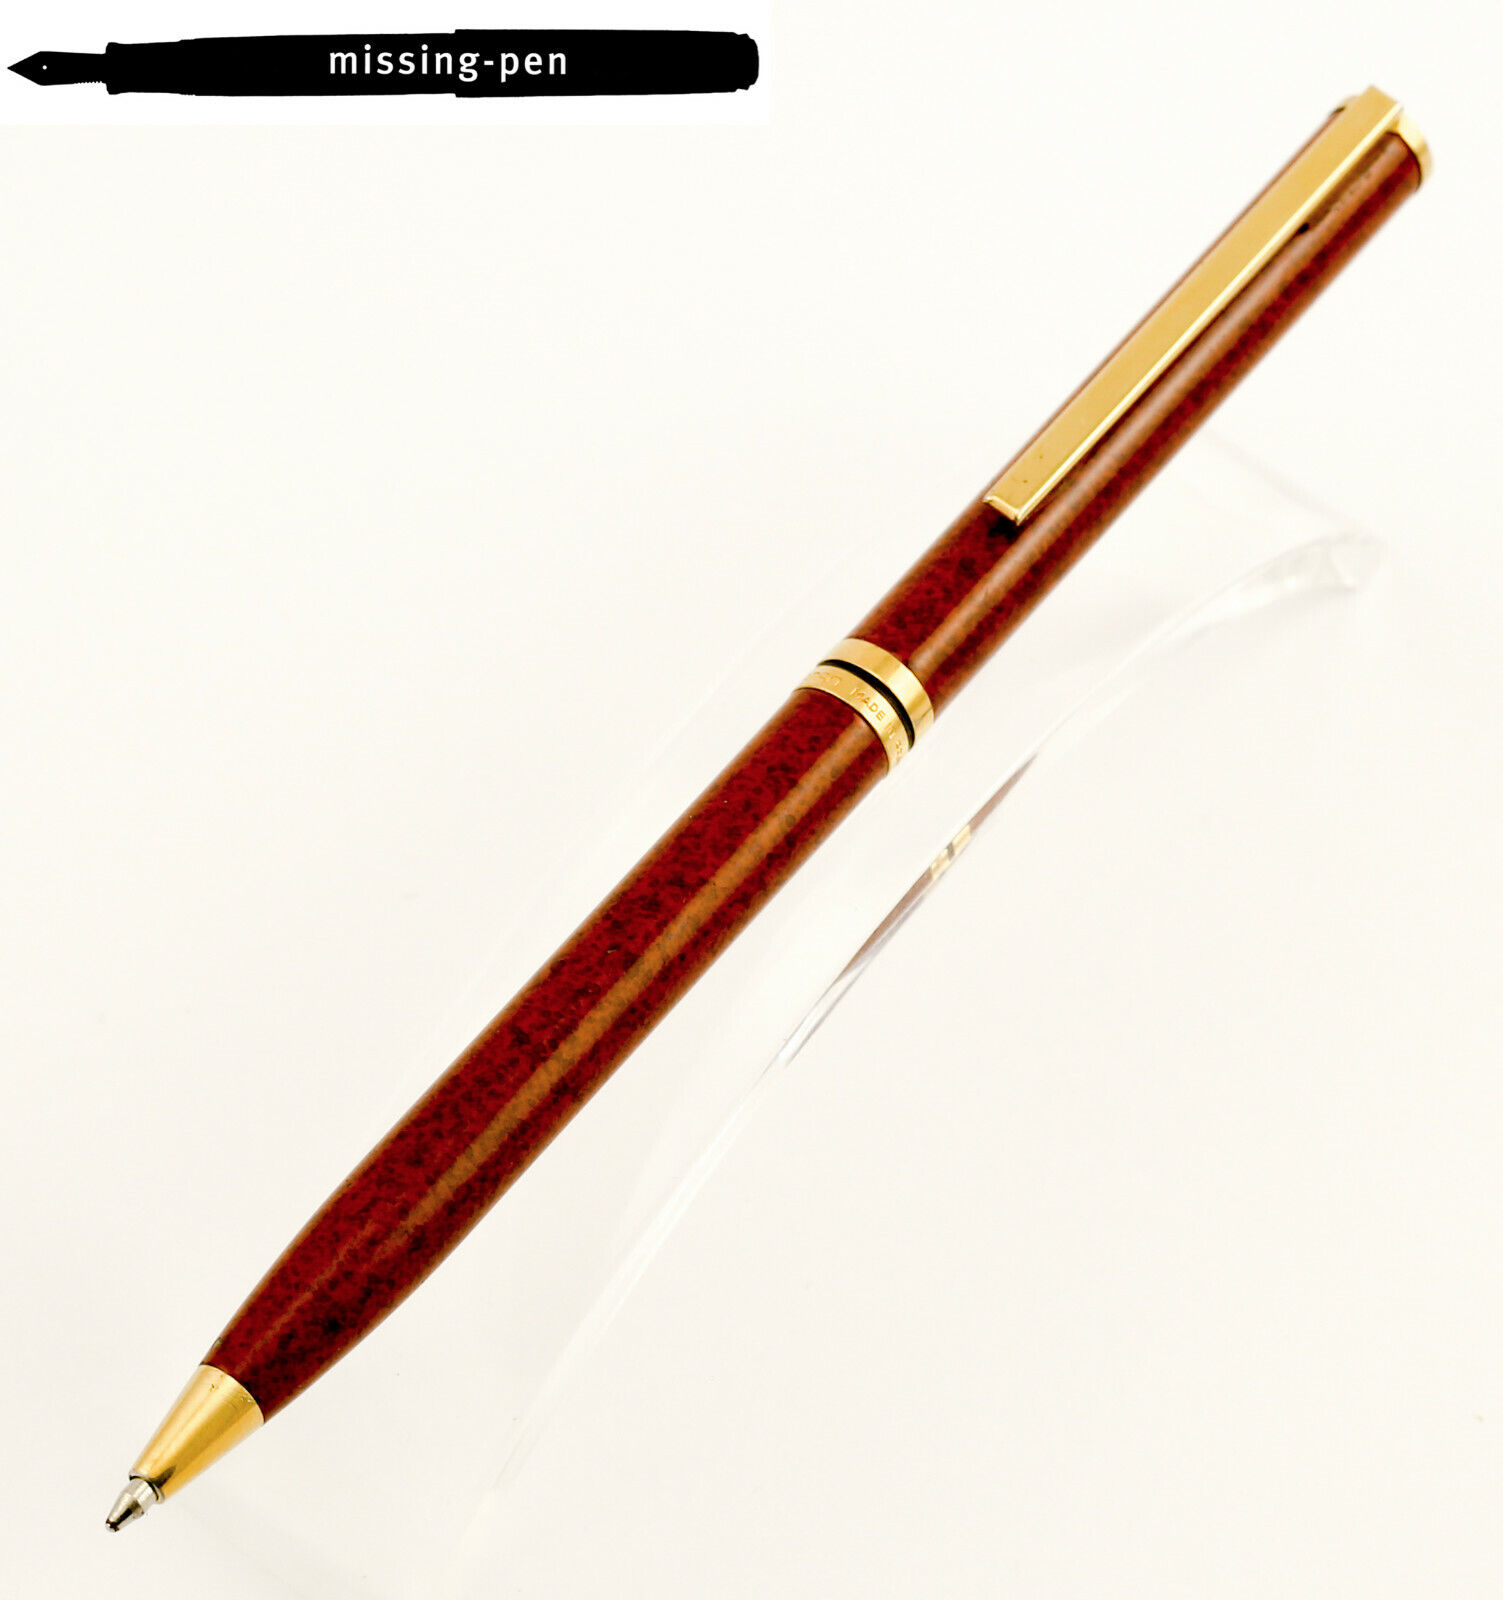 Very slim Waterman Master Ballpoint Pen in Tobacco Brown Marble from around 1977